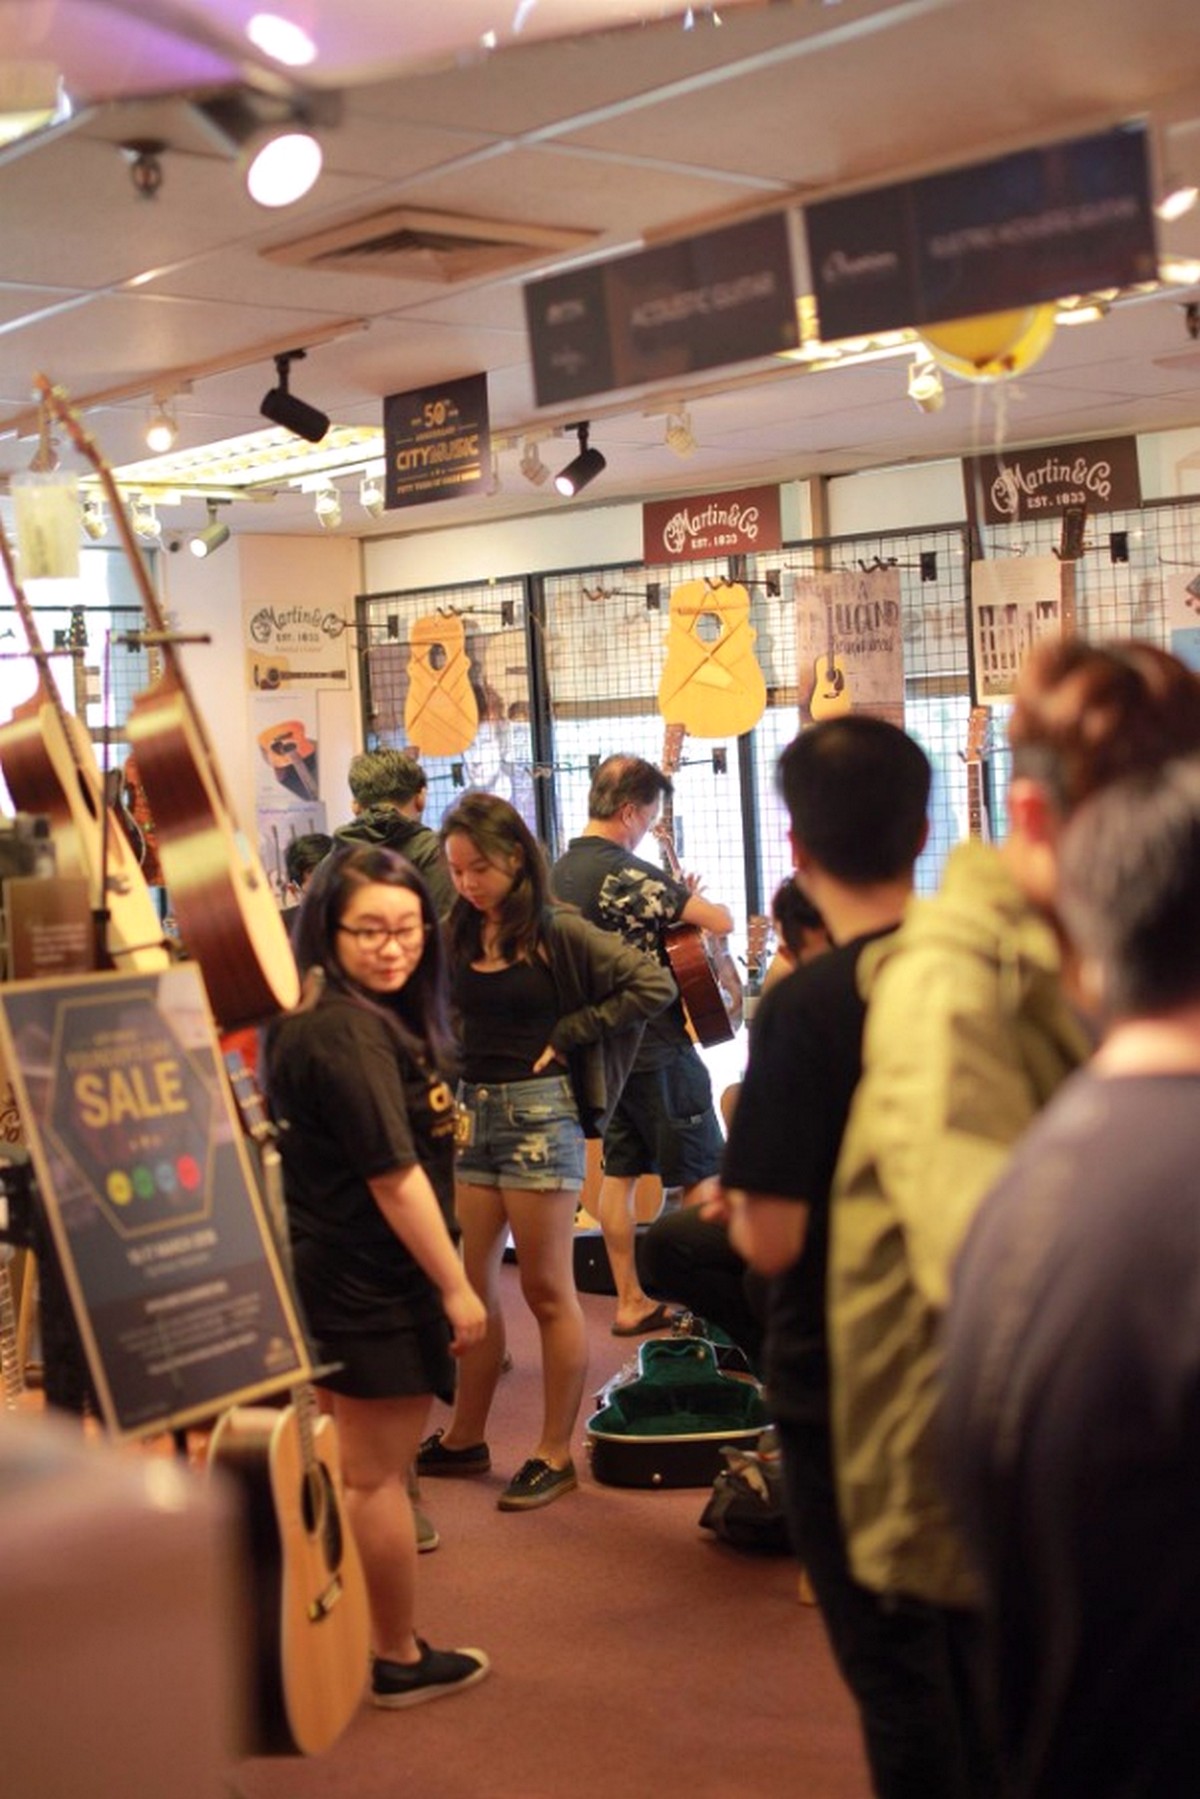 City-Music-Warehouse-Sale-2021-Singapore-Clearance 26-28 Mar 2021: City Music Founder's Day Sale! Display Set Clearance Up to 80% OFF!